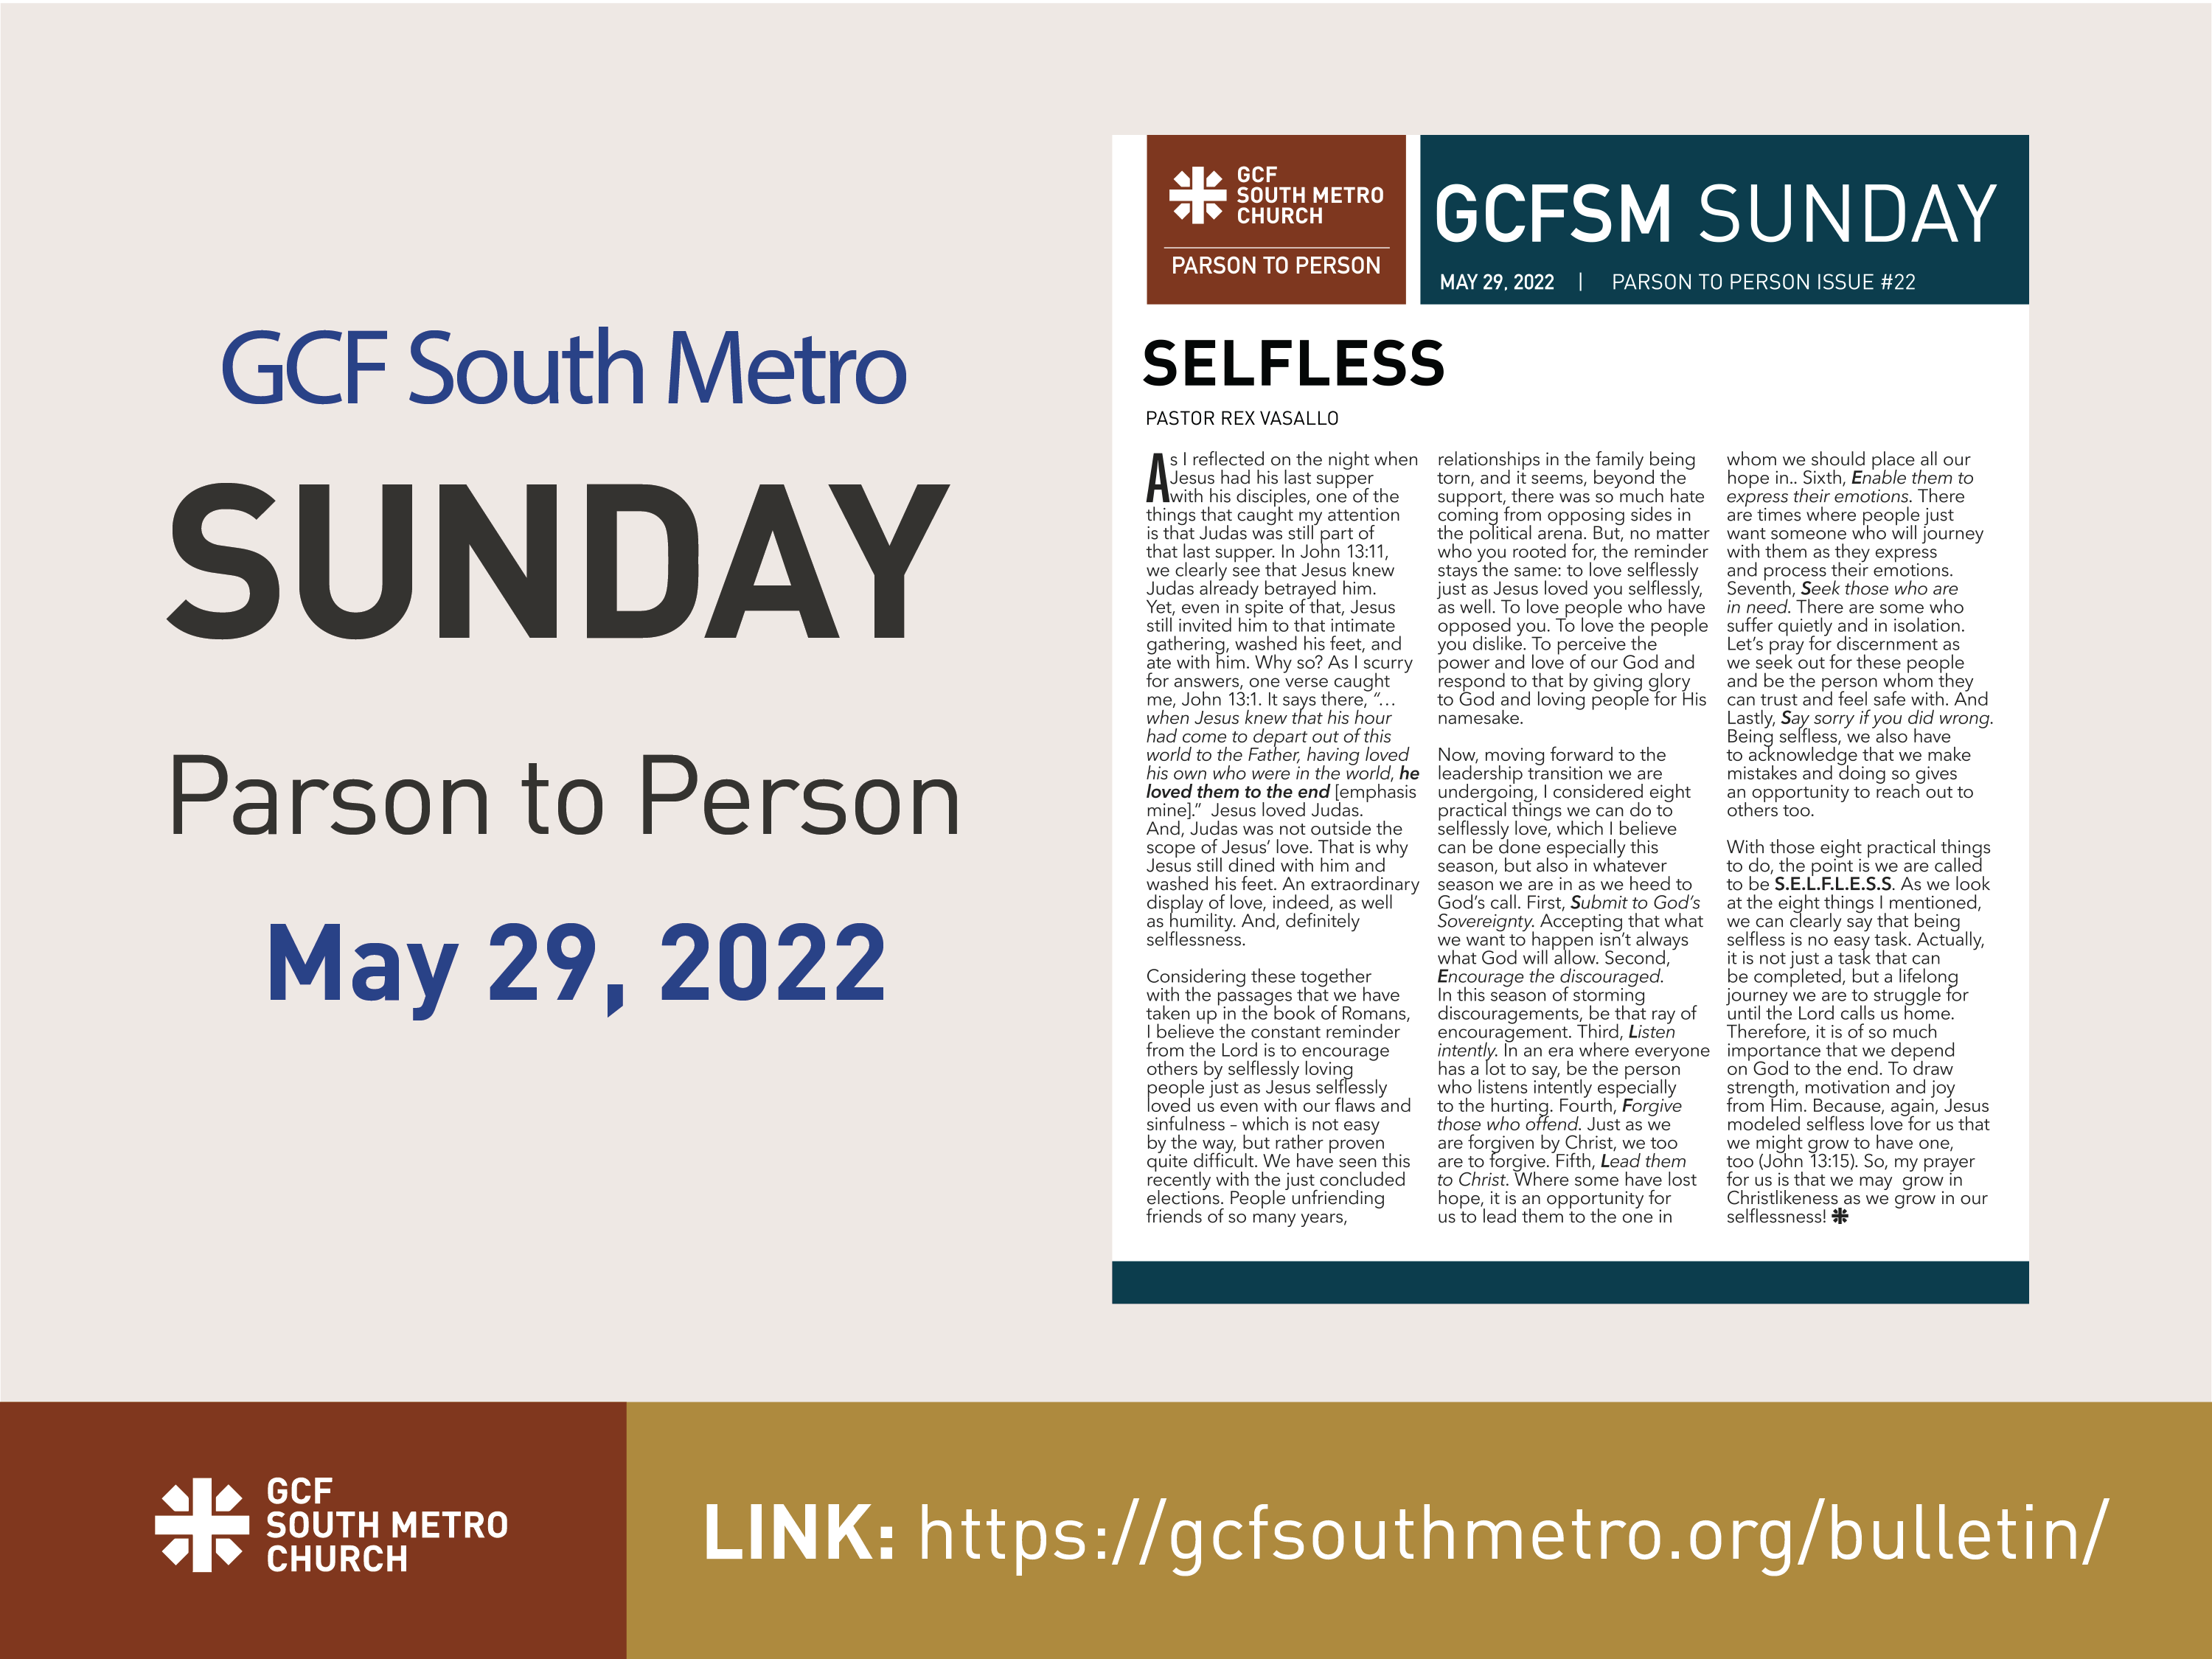 Sunday Bulletin – Parson to Person, May 29, 2022